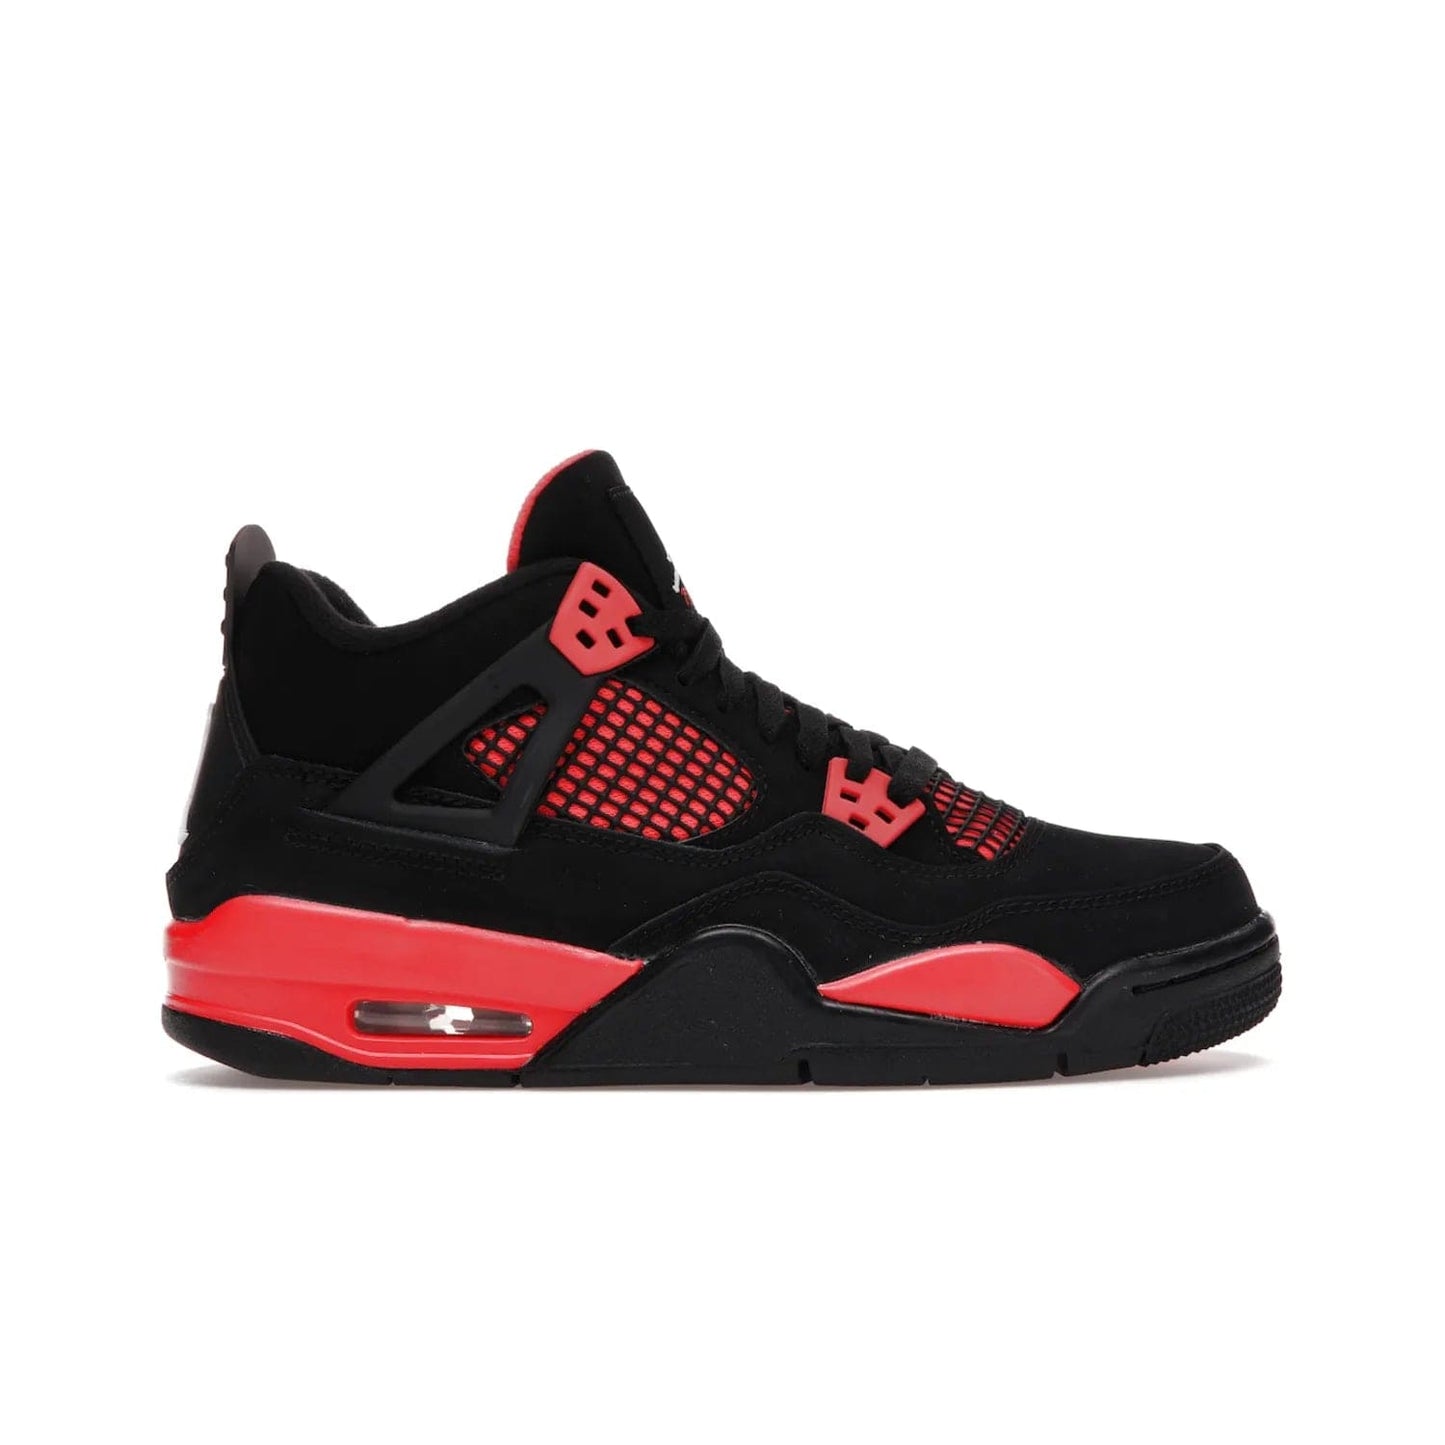 Jordan 4 Retro Red Thunder (GS) - Image 1 - Only at www.BallersClubKickz.com - The Air Jordan 4 Retro Red Thunder GS features a stylish black and crimson upper with a Jumpman logo. Athletic midsole with Air bubbles for cushioning and black rubber outsole with iconic motif complete this classic sneaker.